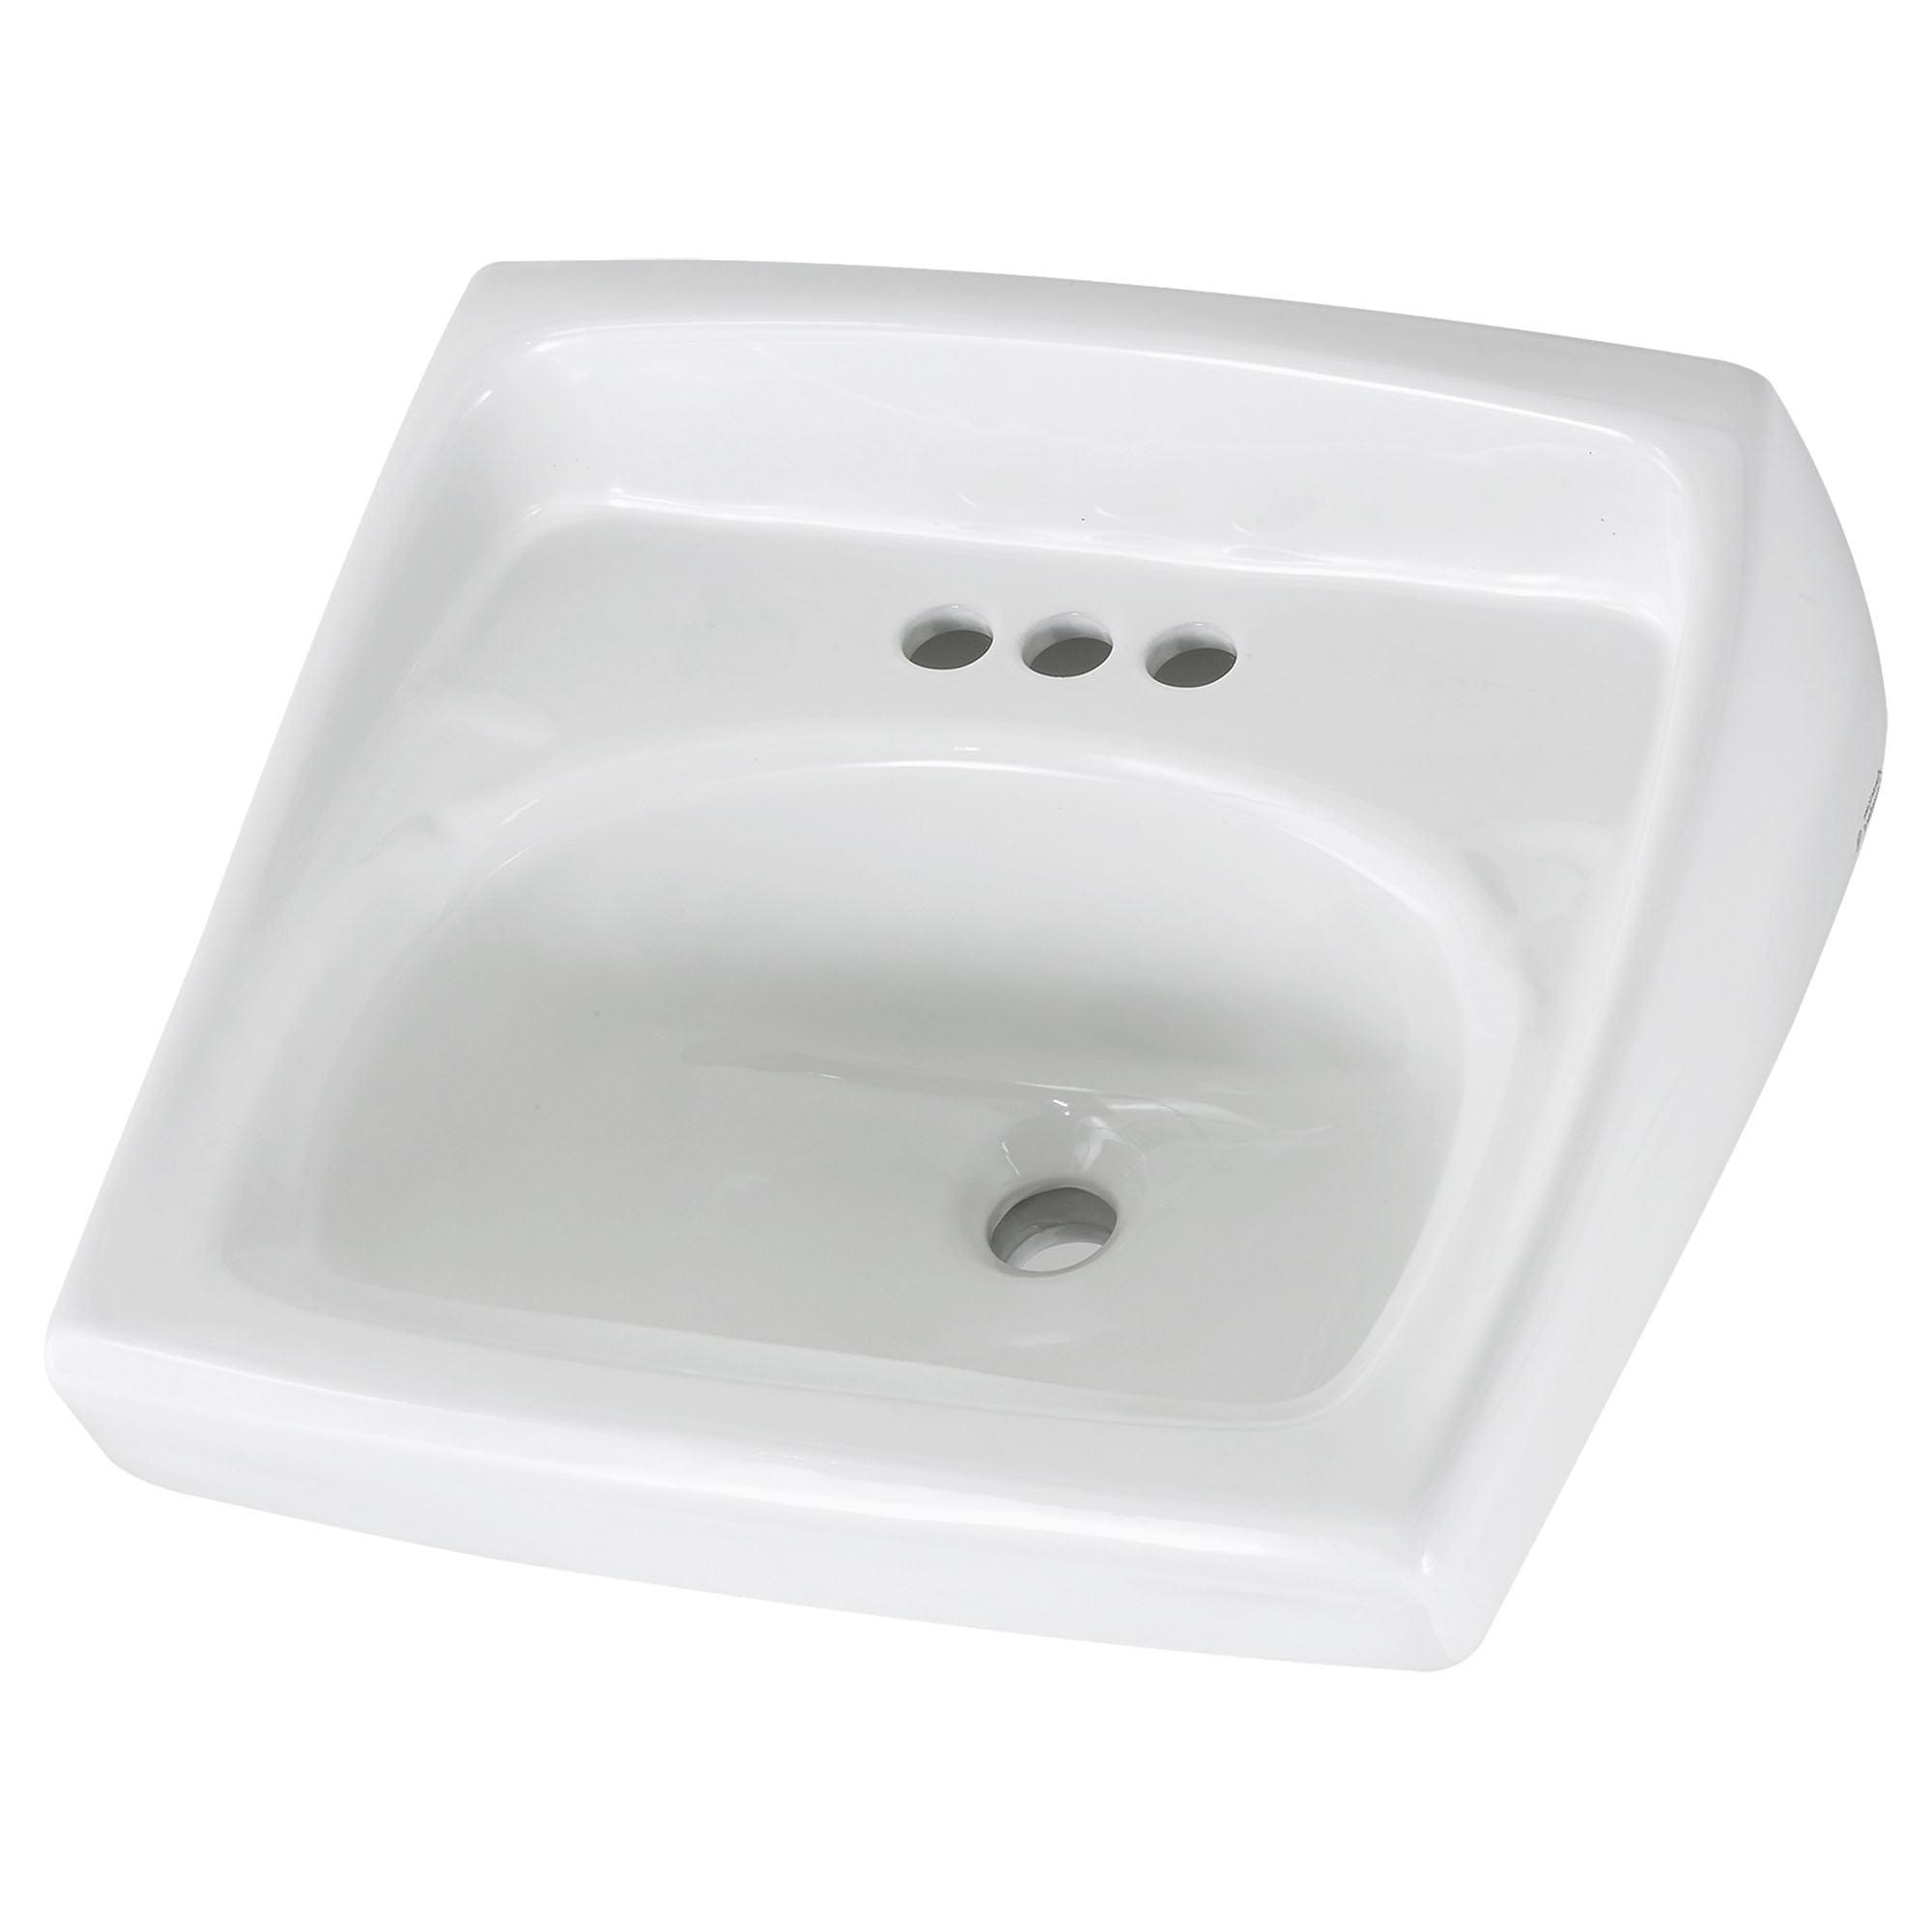 Lucerne Wall-Hung Sink for Exposed Bracket Support With 4-Inch Centerset